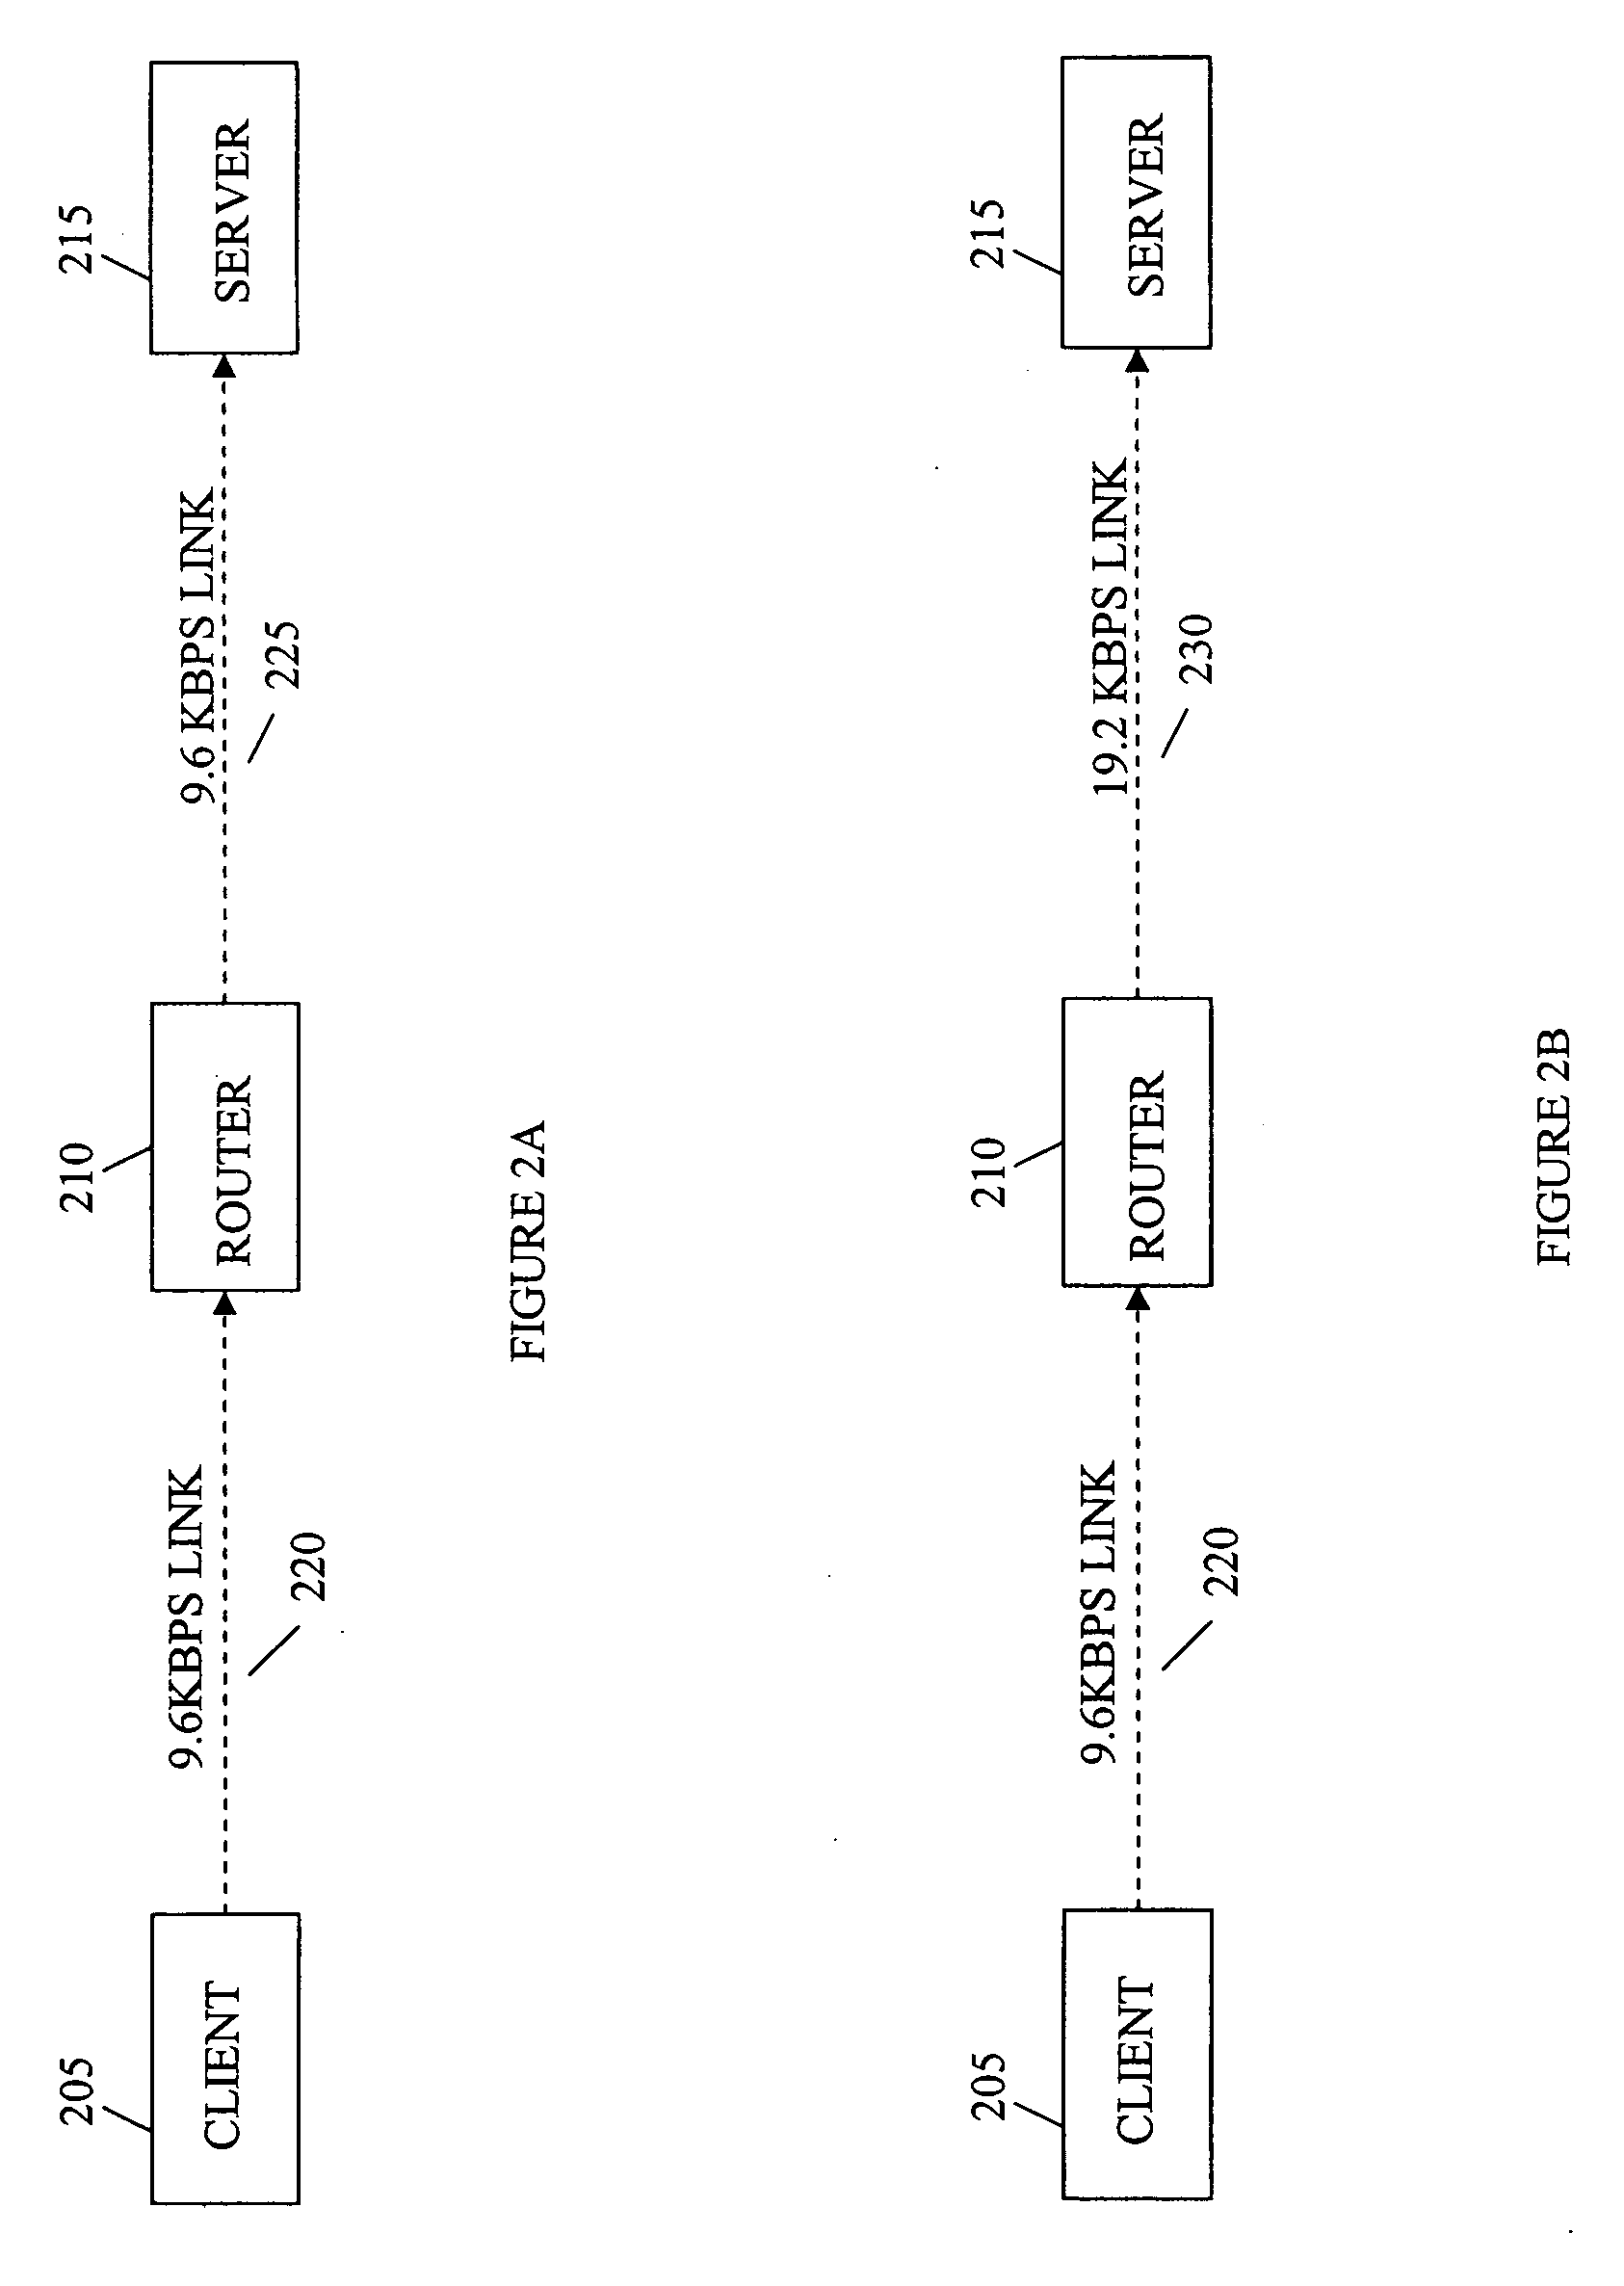 System and method for analysis of communications networks